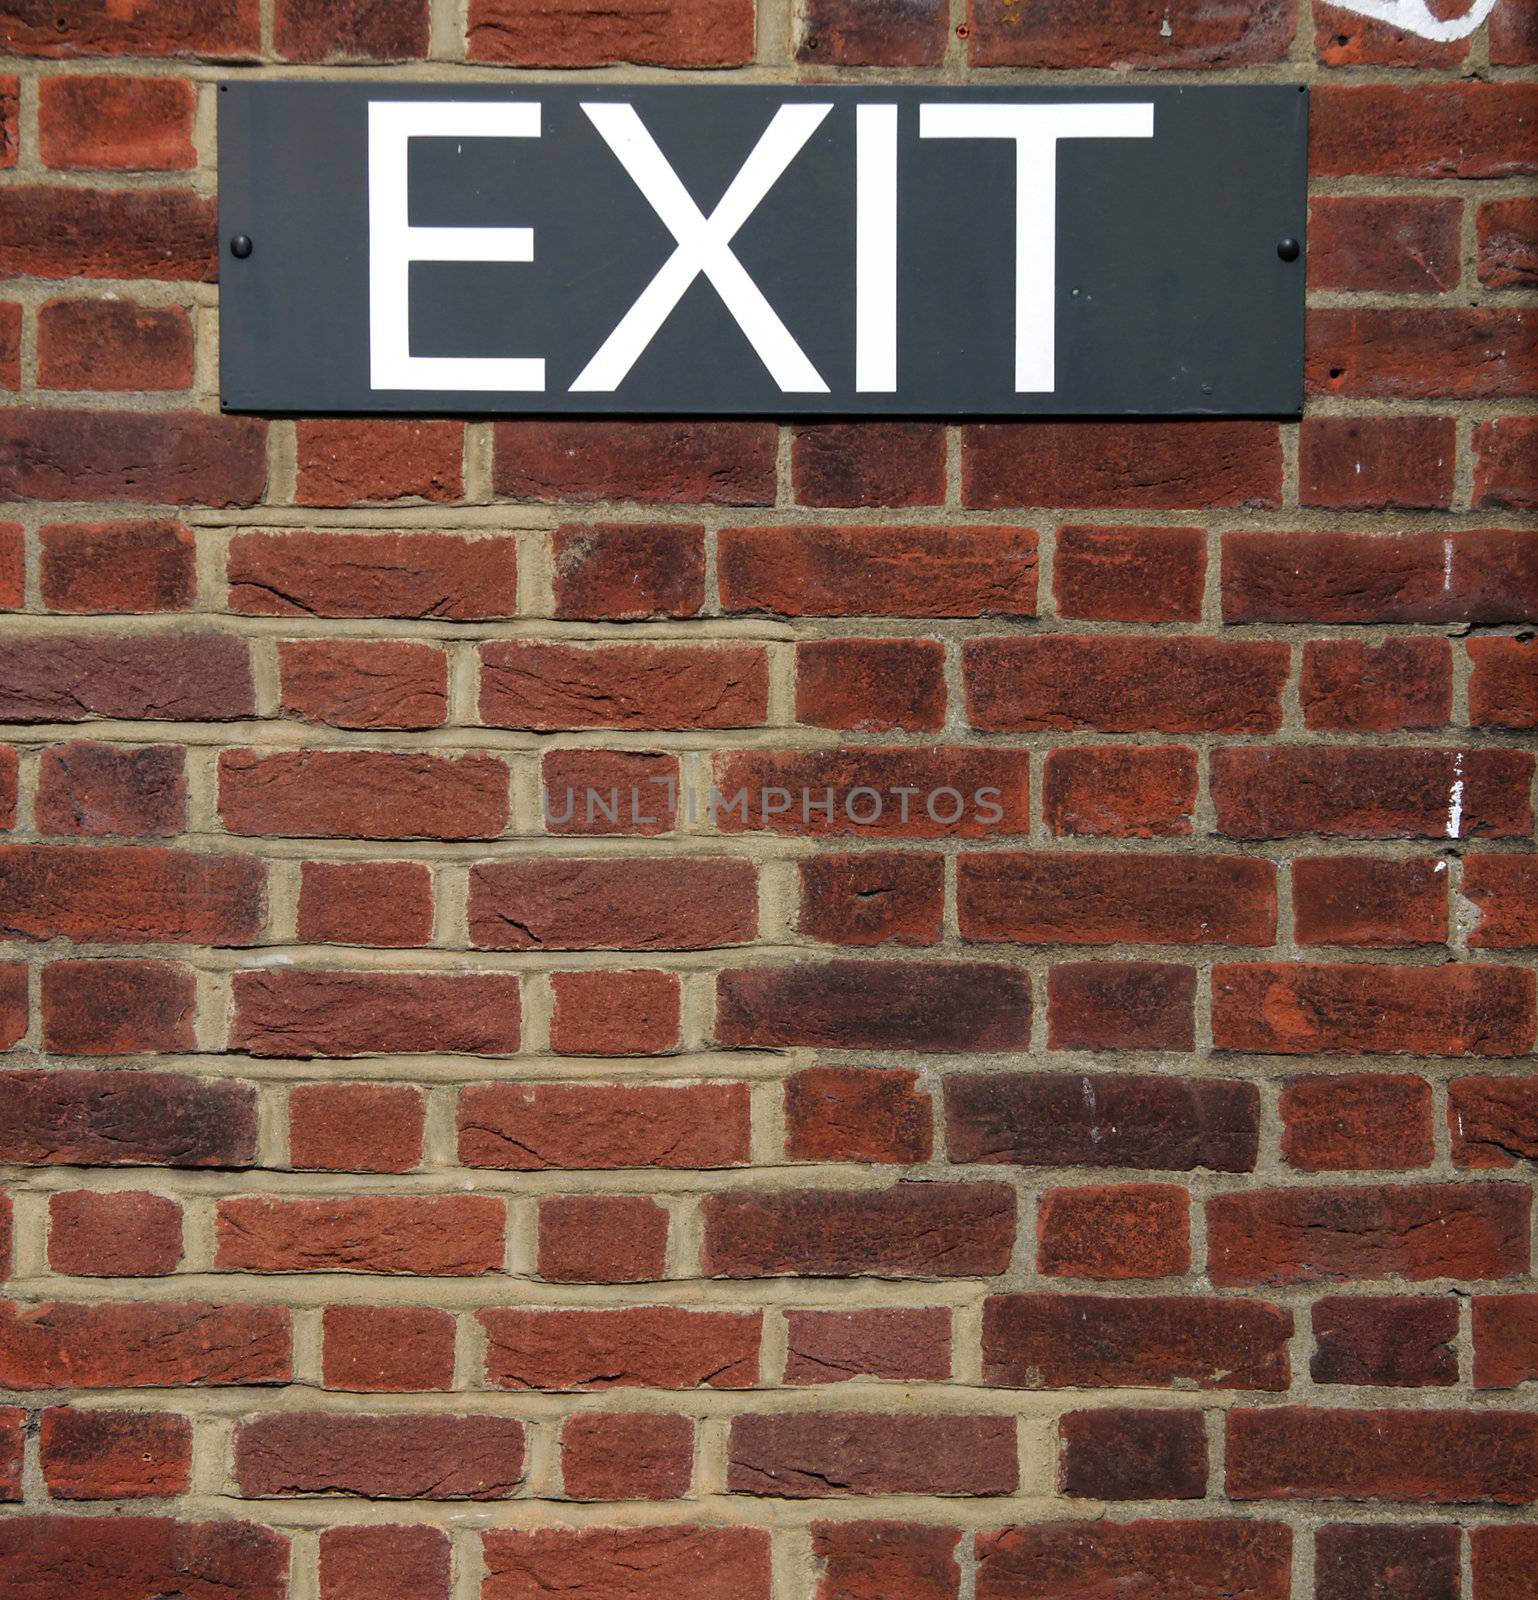 A black and white exit sign put up on a red brick wall